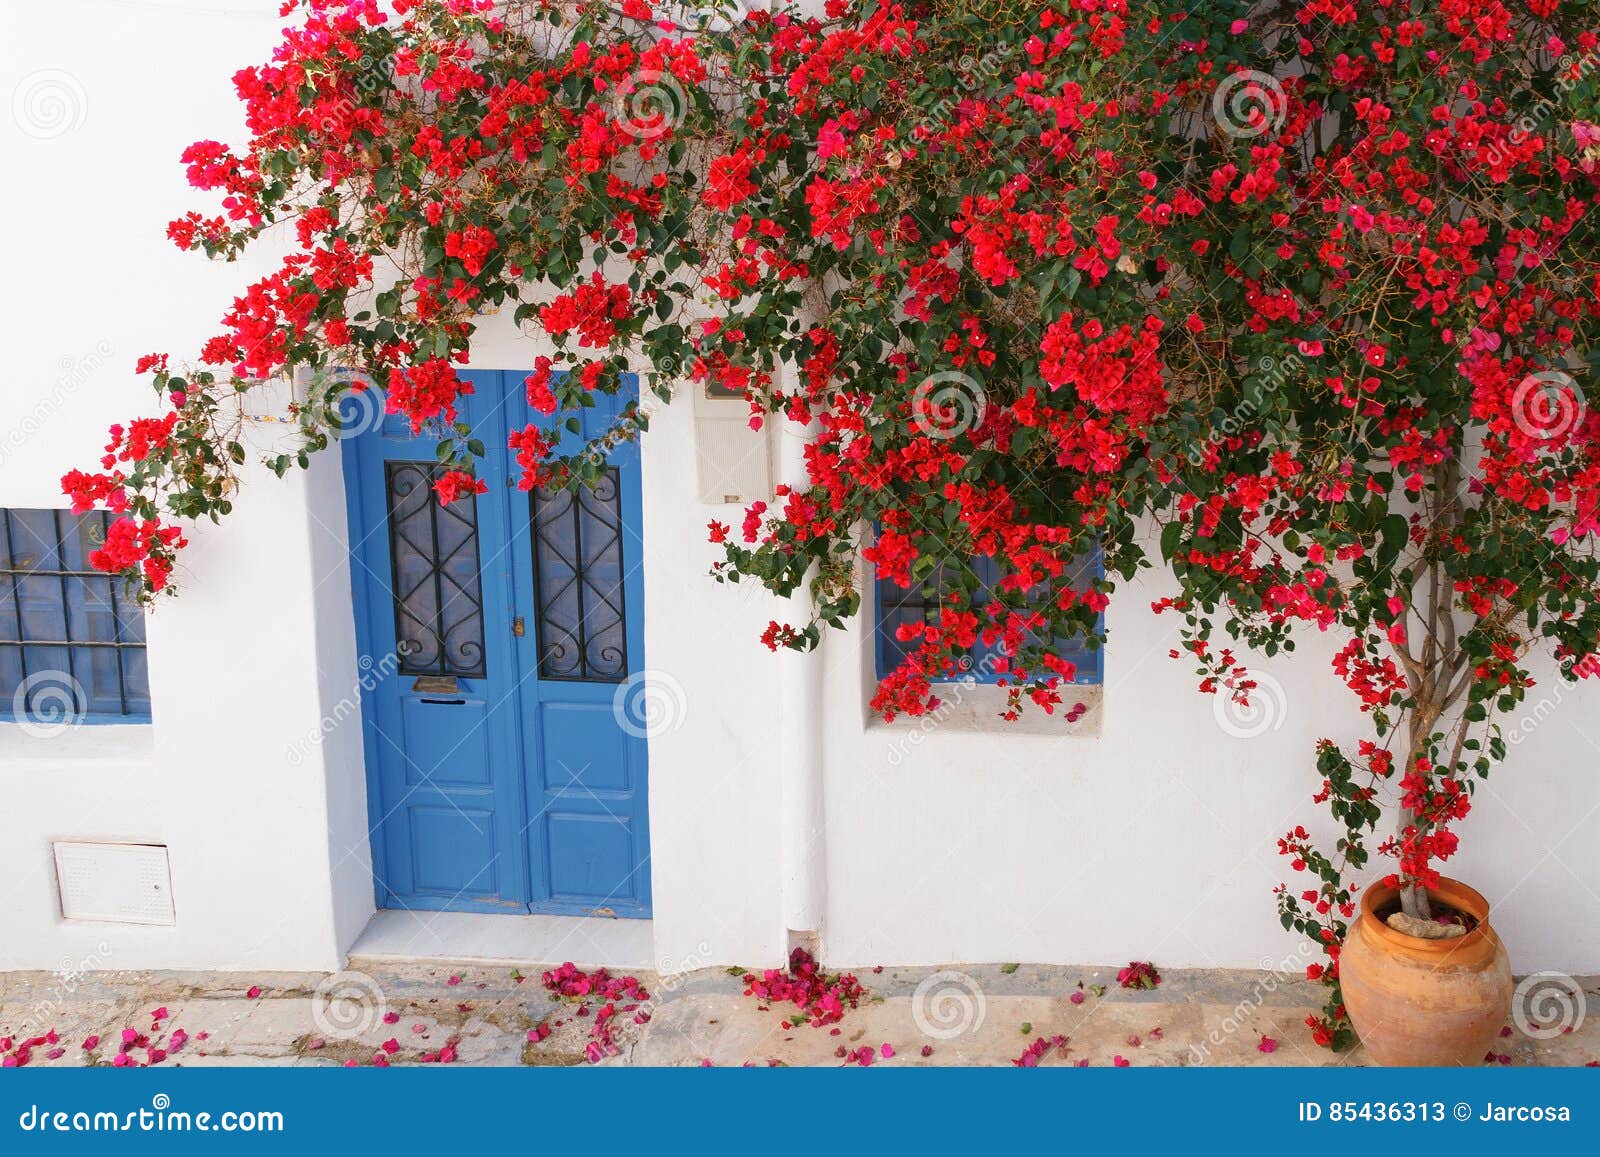 Bougainvillea Flowered on the Facade of a House Typical of Nijar,  Andalusia, Spain Stock Image - Image of architecture, house: 85436313